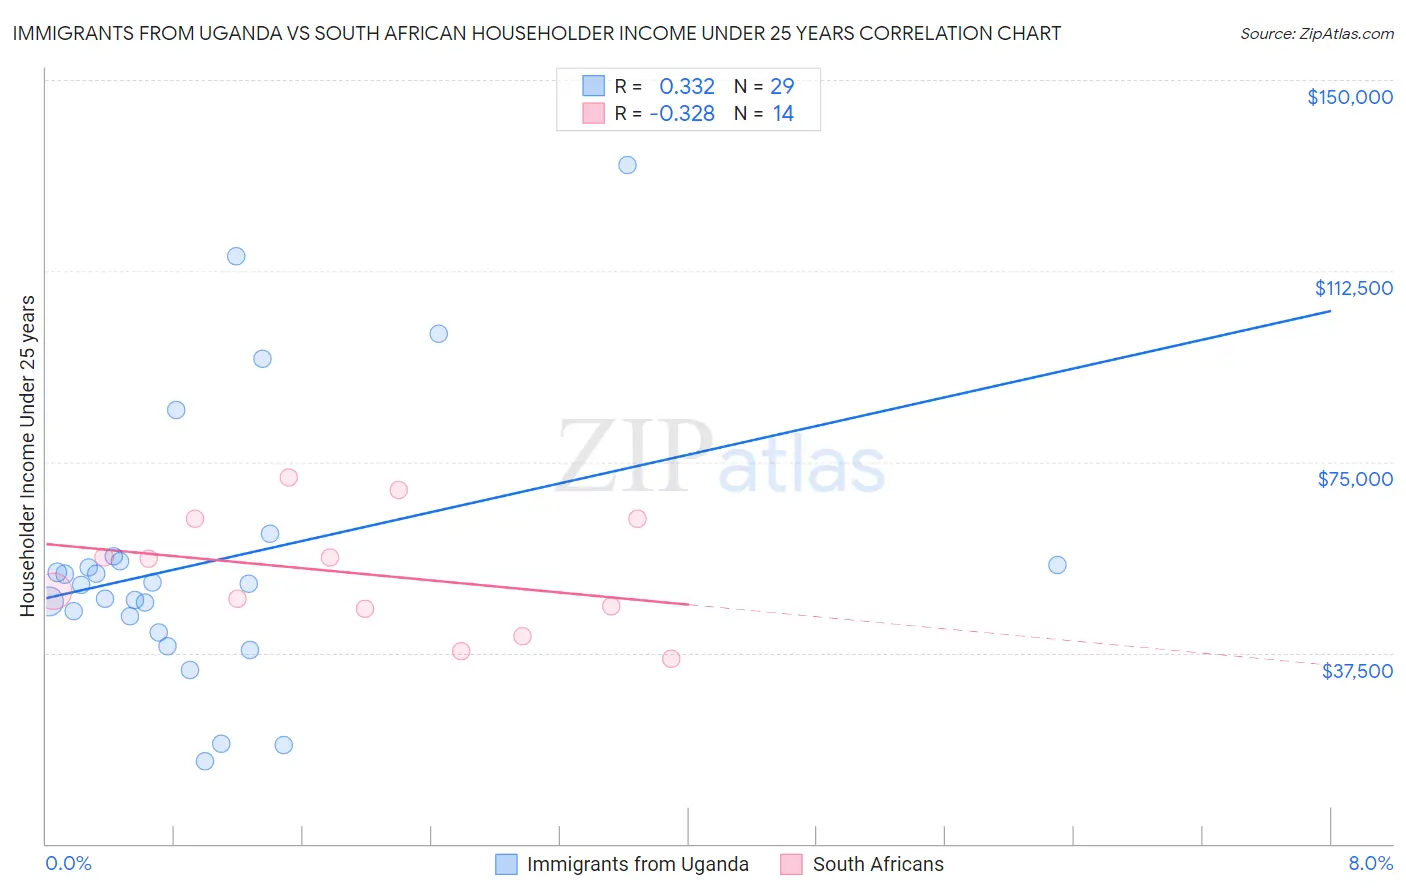 Immigrants from Uganda vs South African Householder Income Under 25 years